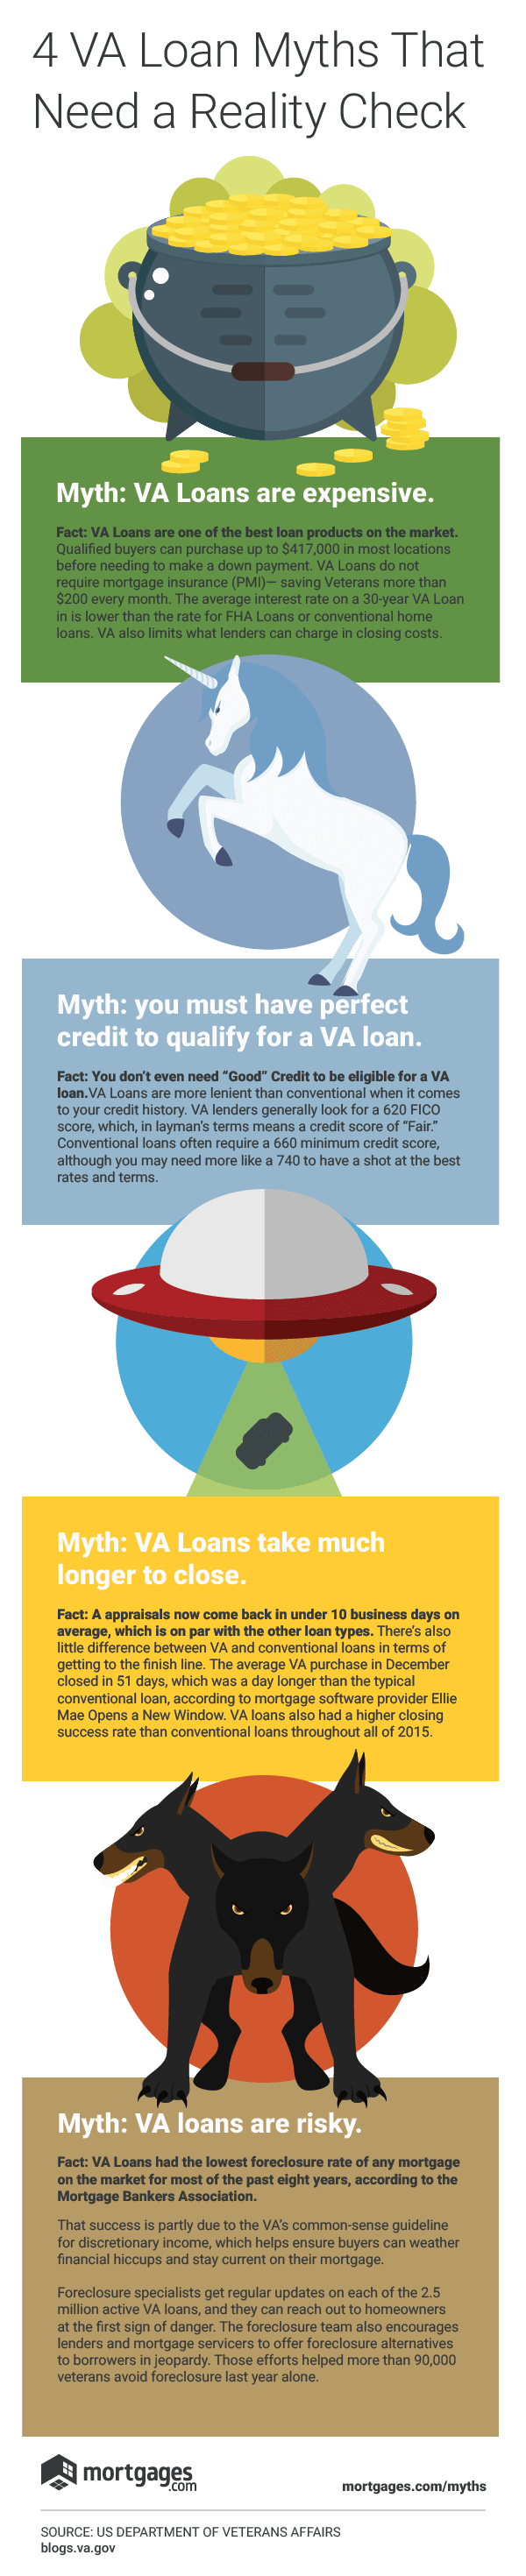 Is a VA loan a qualified mortgage?